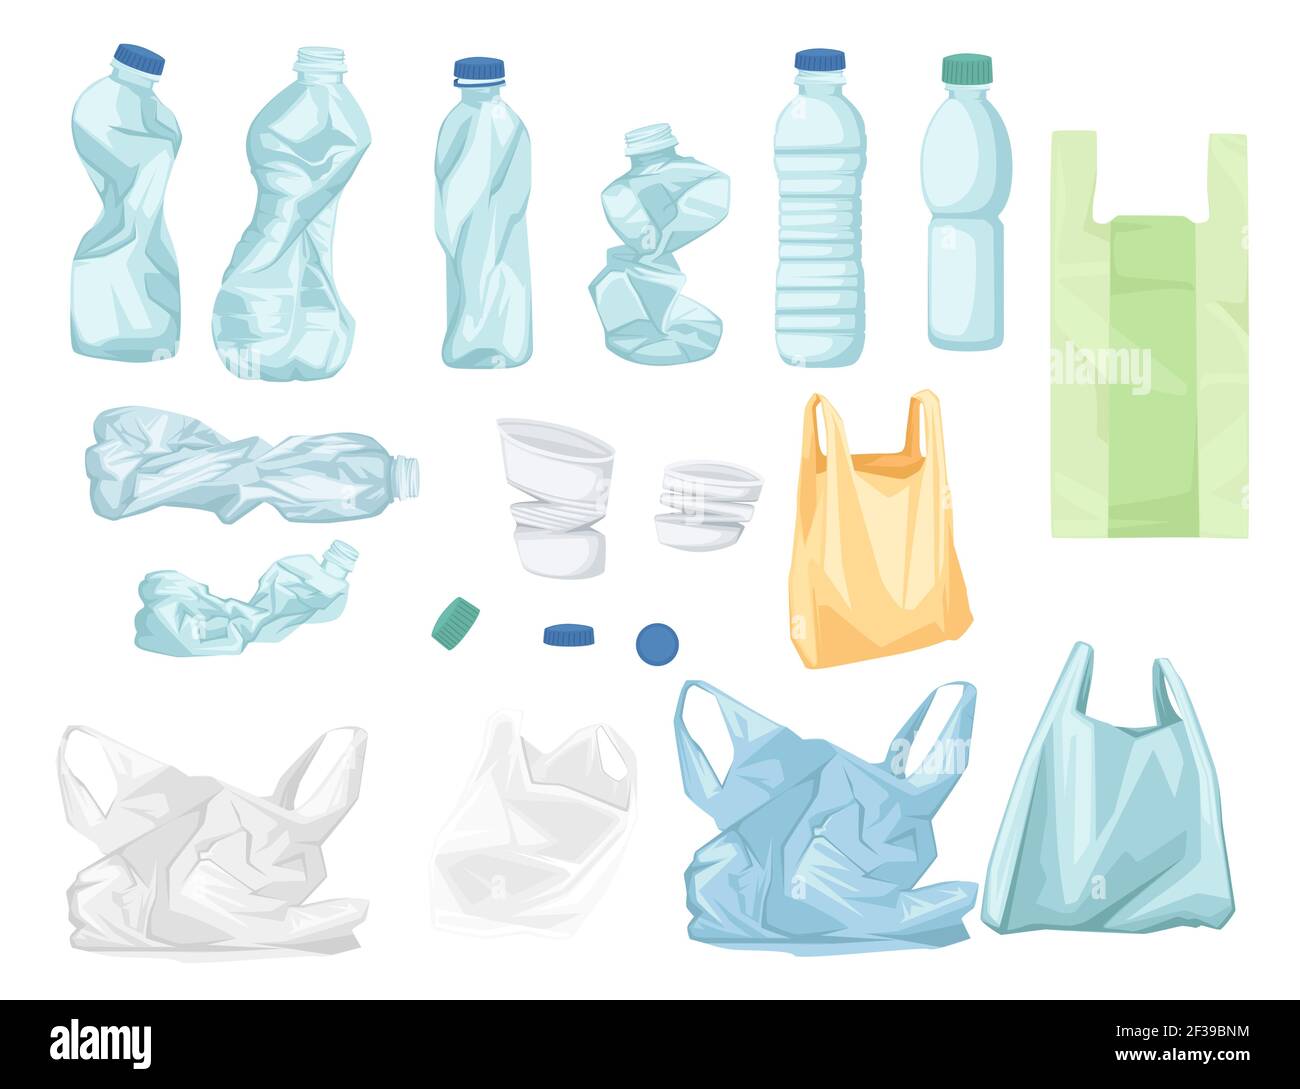 Set of plastic trash bags and bottles recycling ecology problem vector illustration isolated on white background Stock Vector